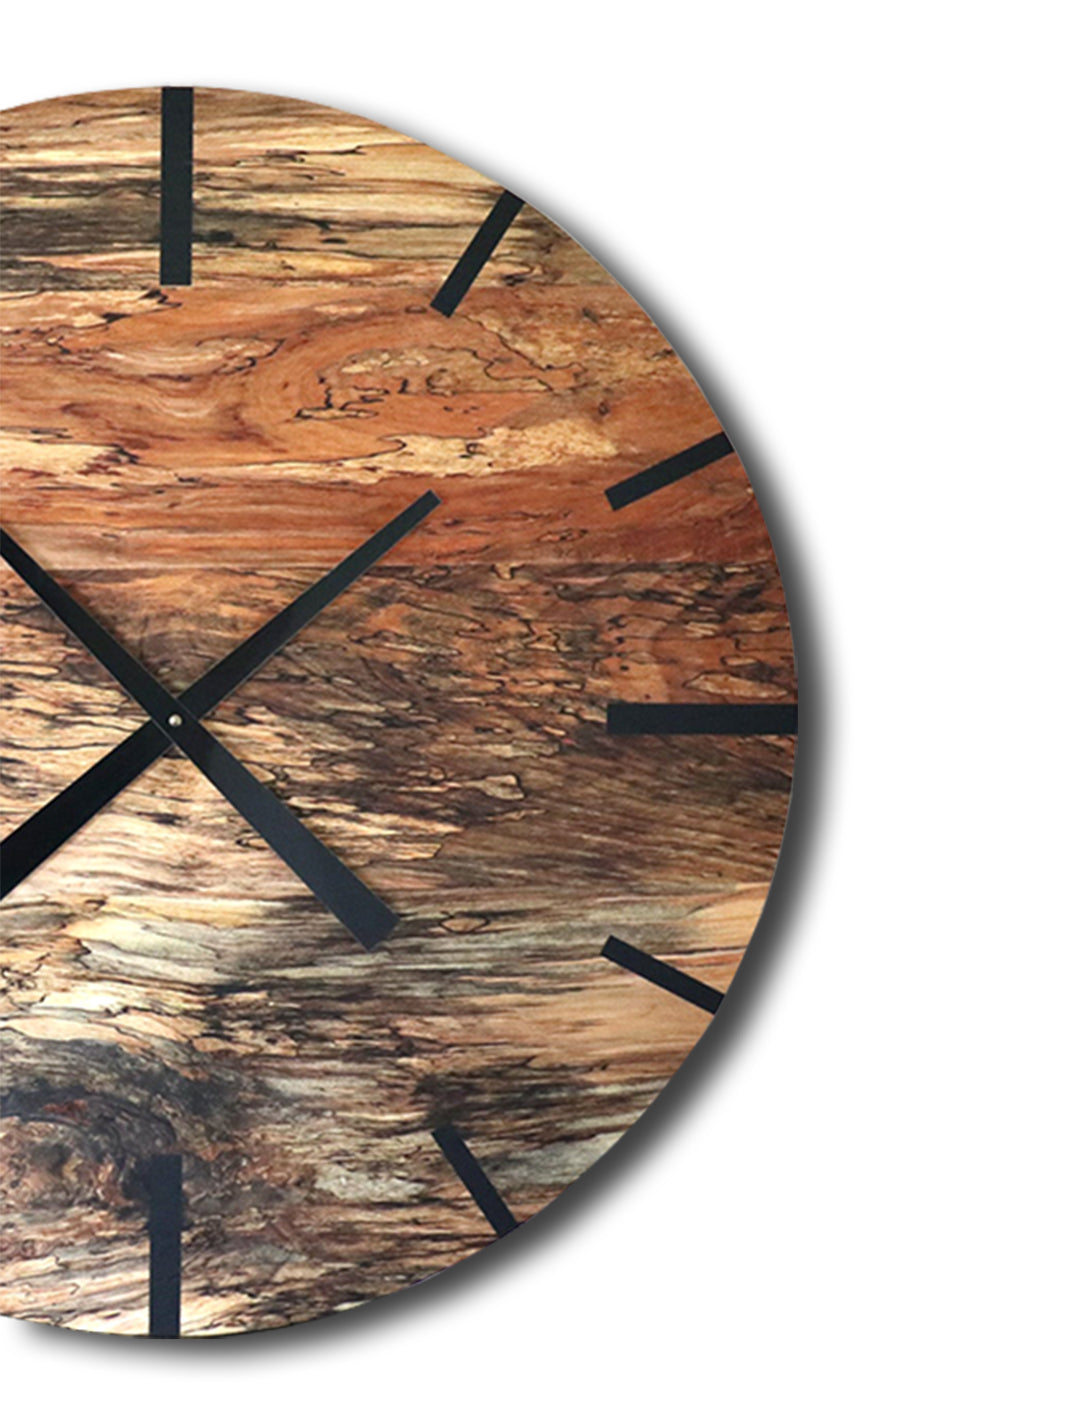 Mid Century Modern Hardwood Spalted Maple Wall Clock with Black Number Lines Earthly Comfort Clocks 648-1